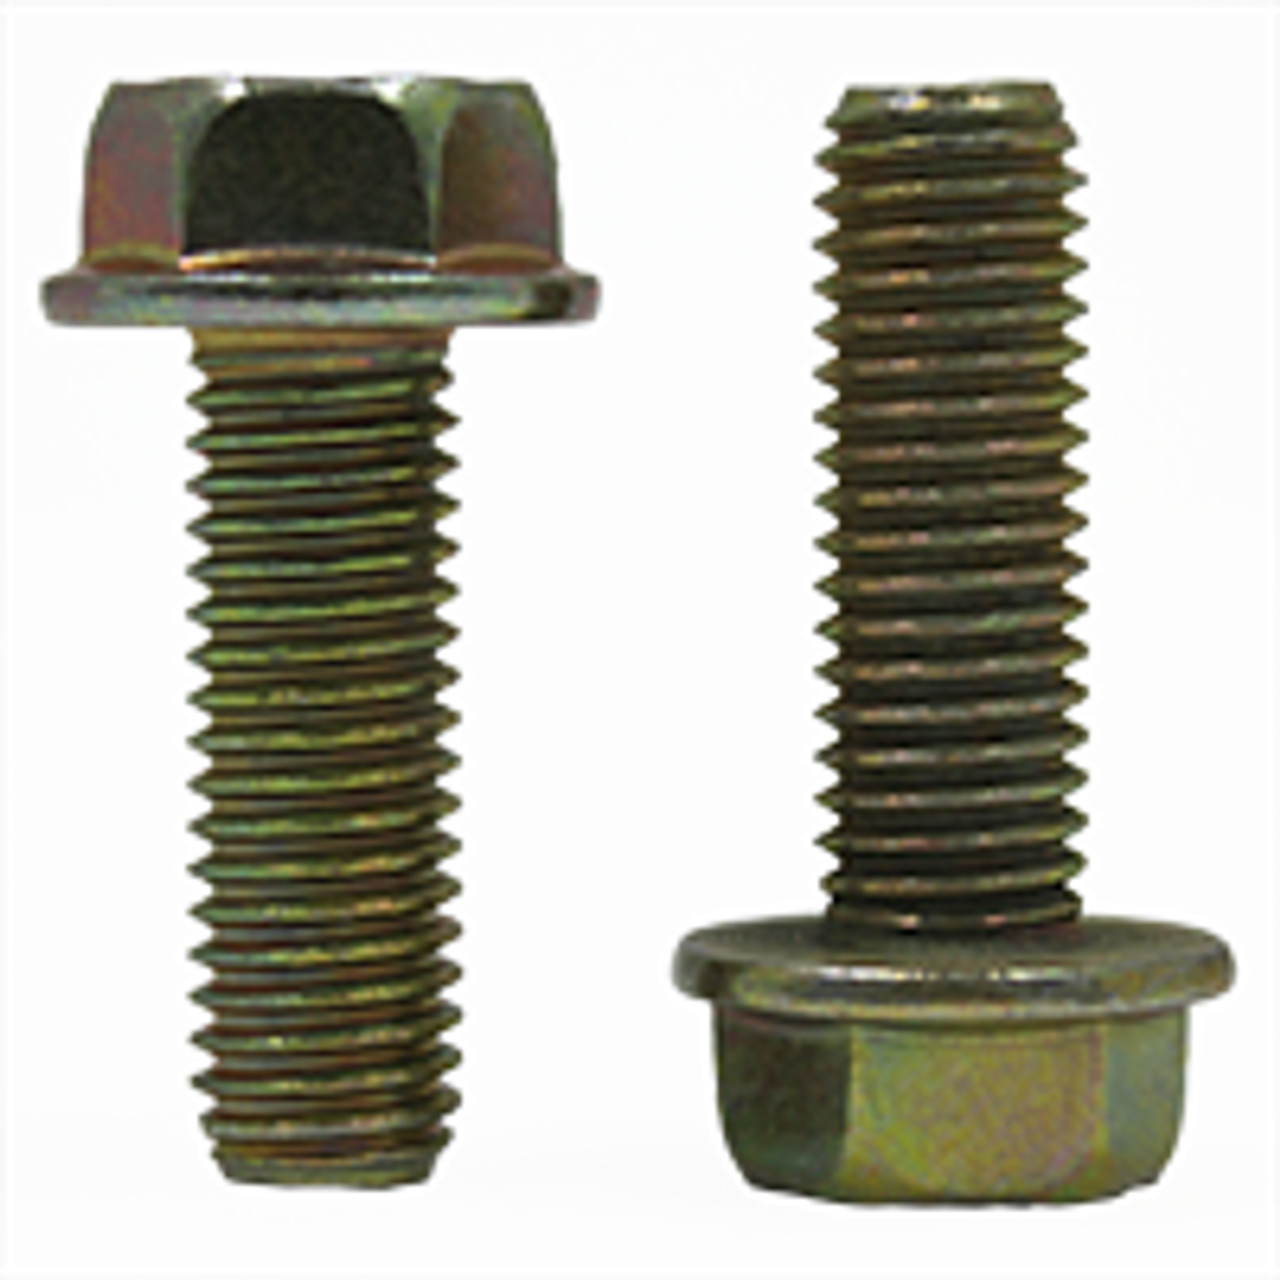 5/16"-18 x 1" Stainless Steel Flange Bolts AFT Fasteners